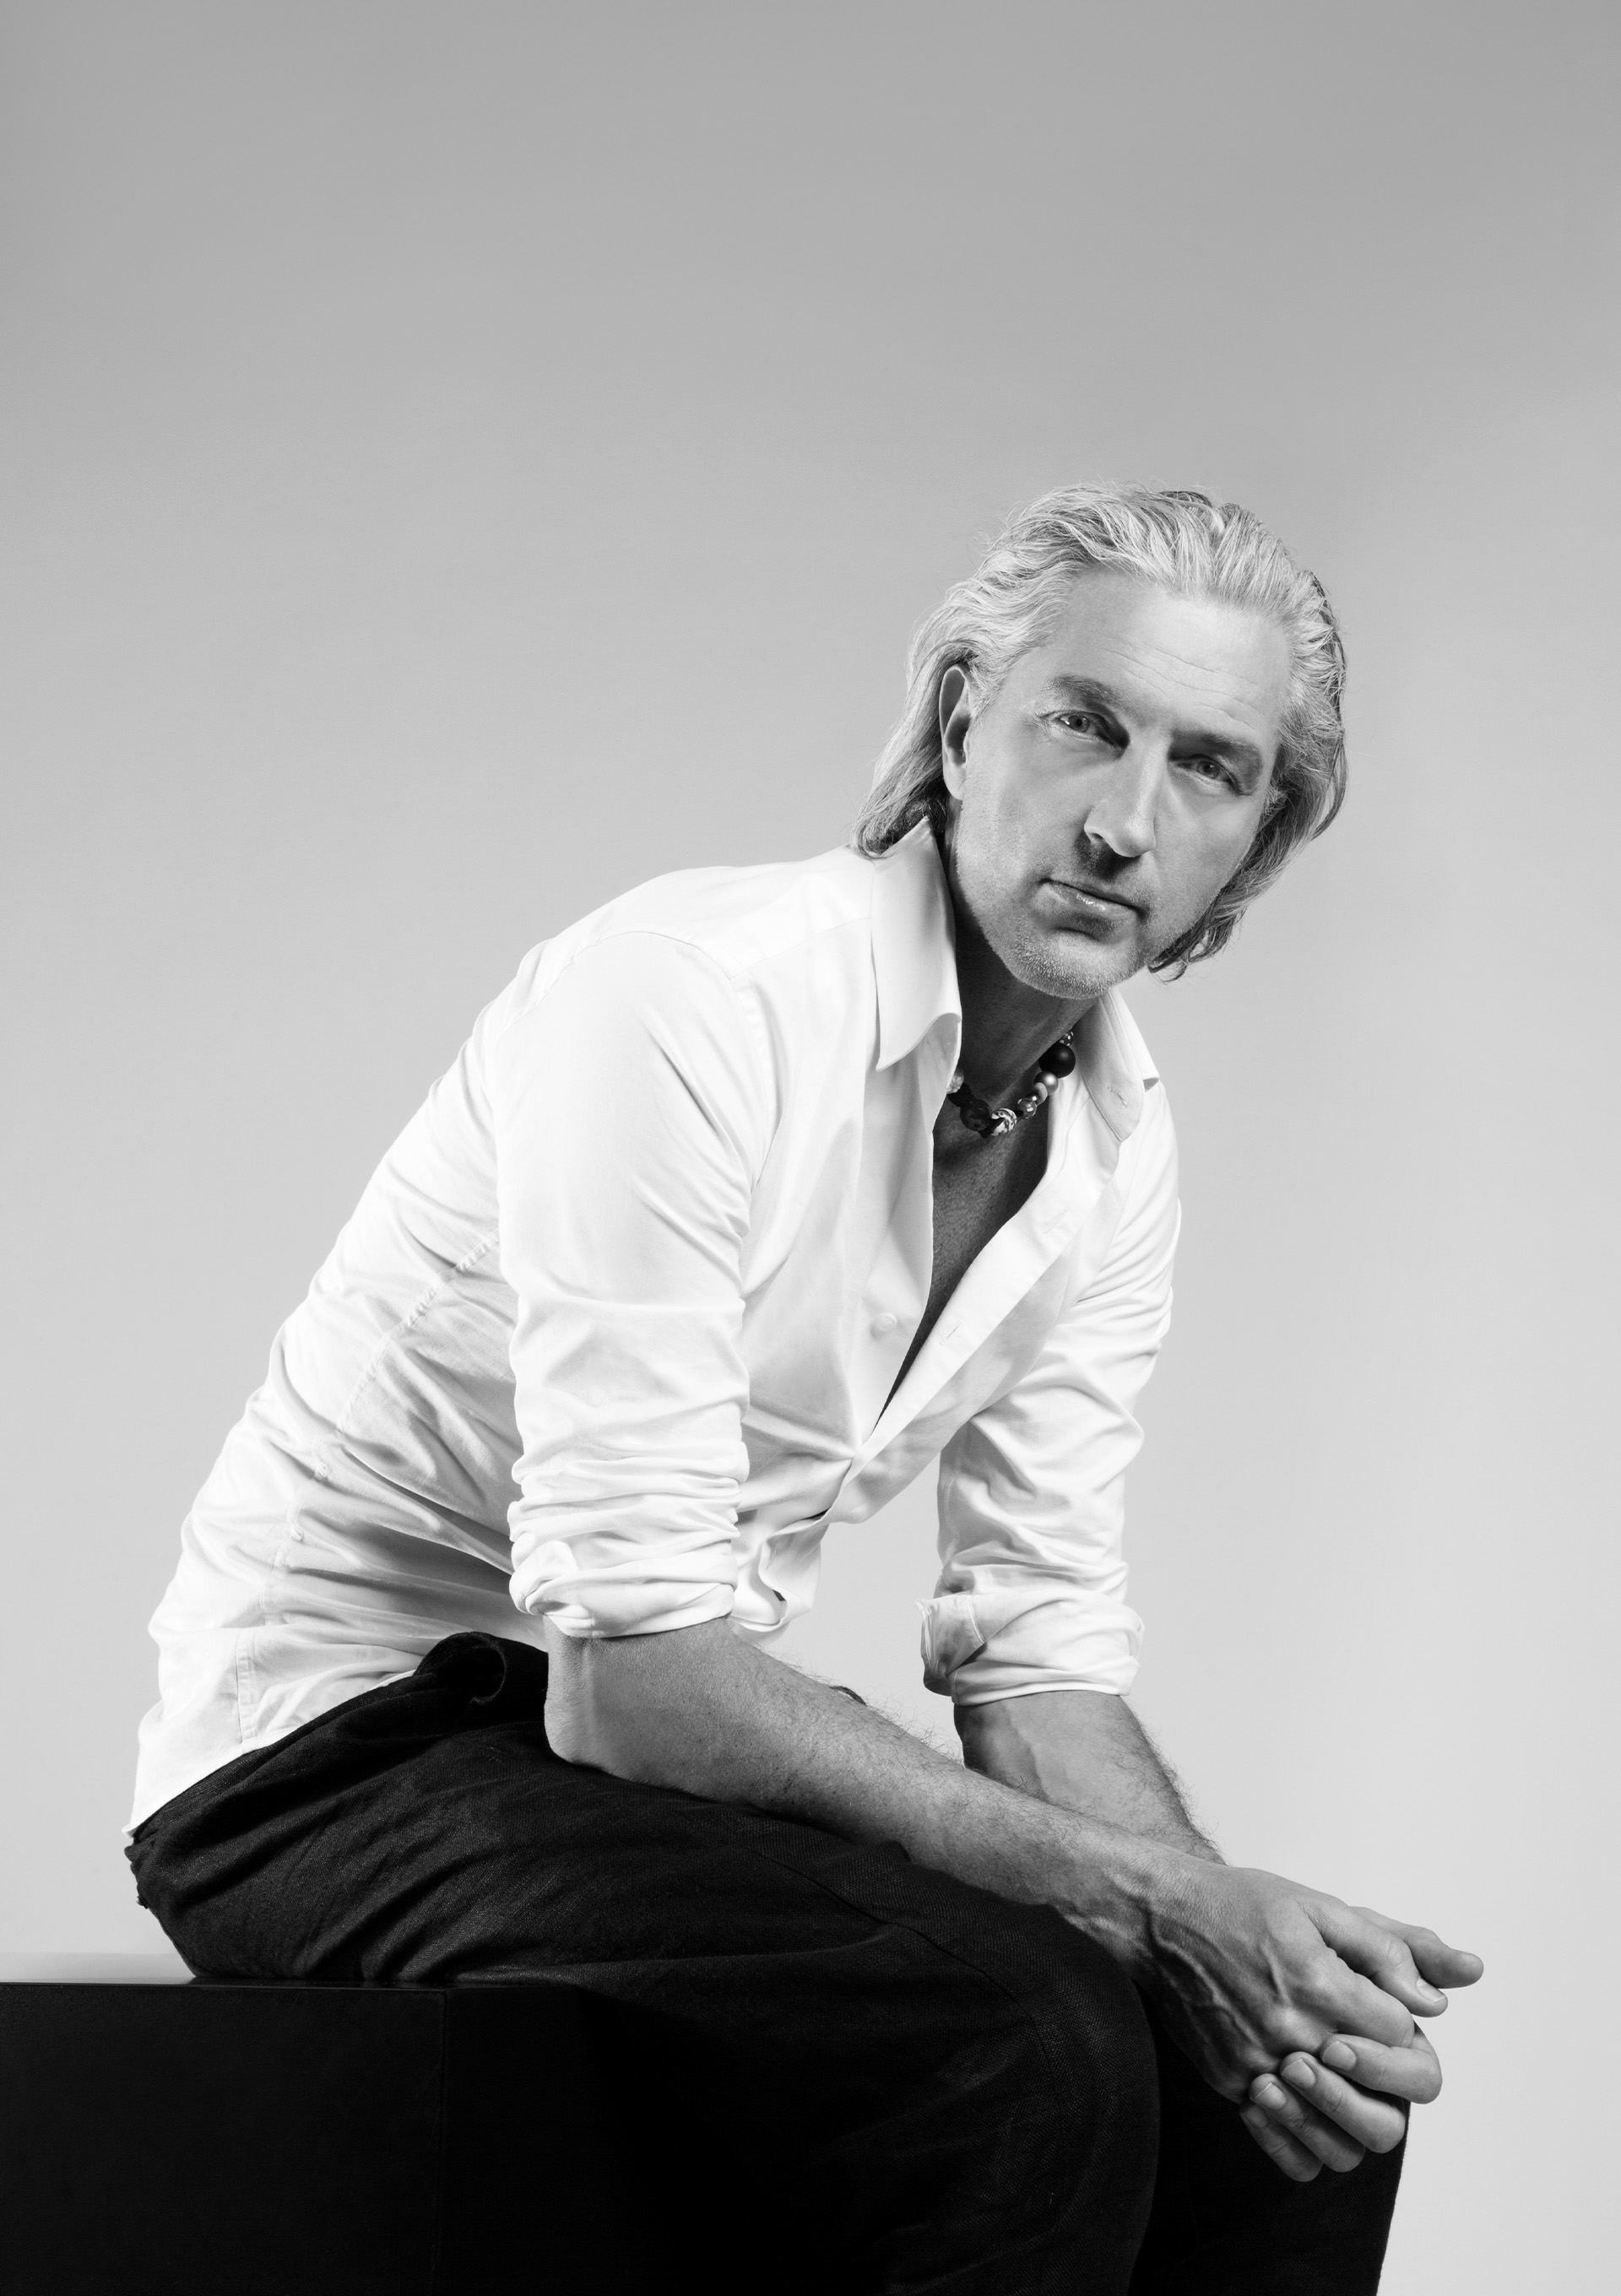 Marcel Wanders sits and looks directly into the camera with his hands clasped.